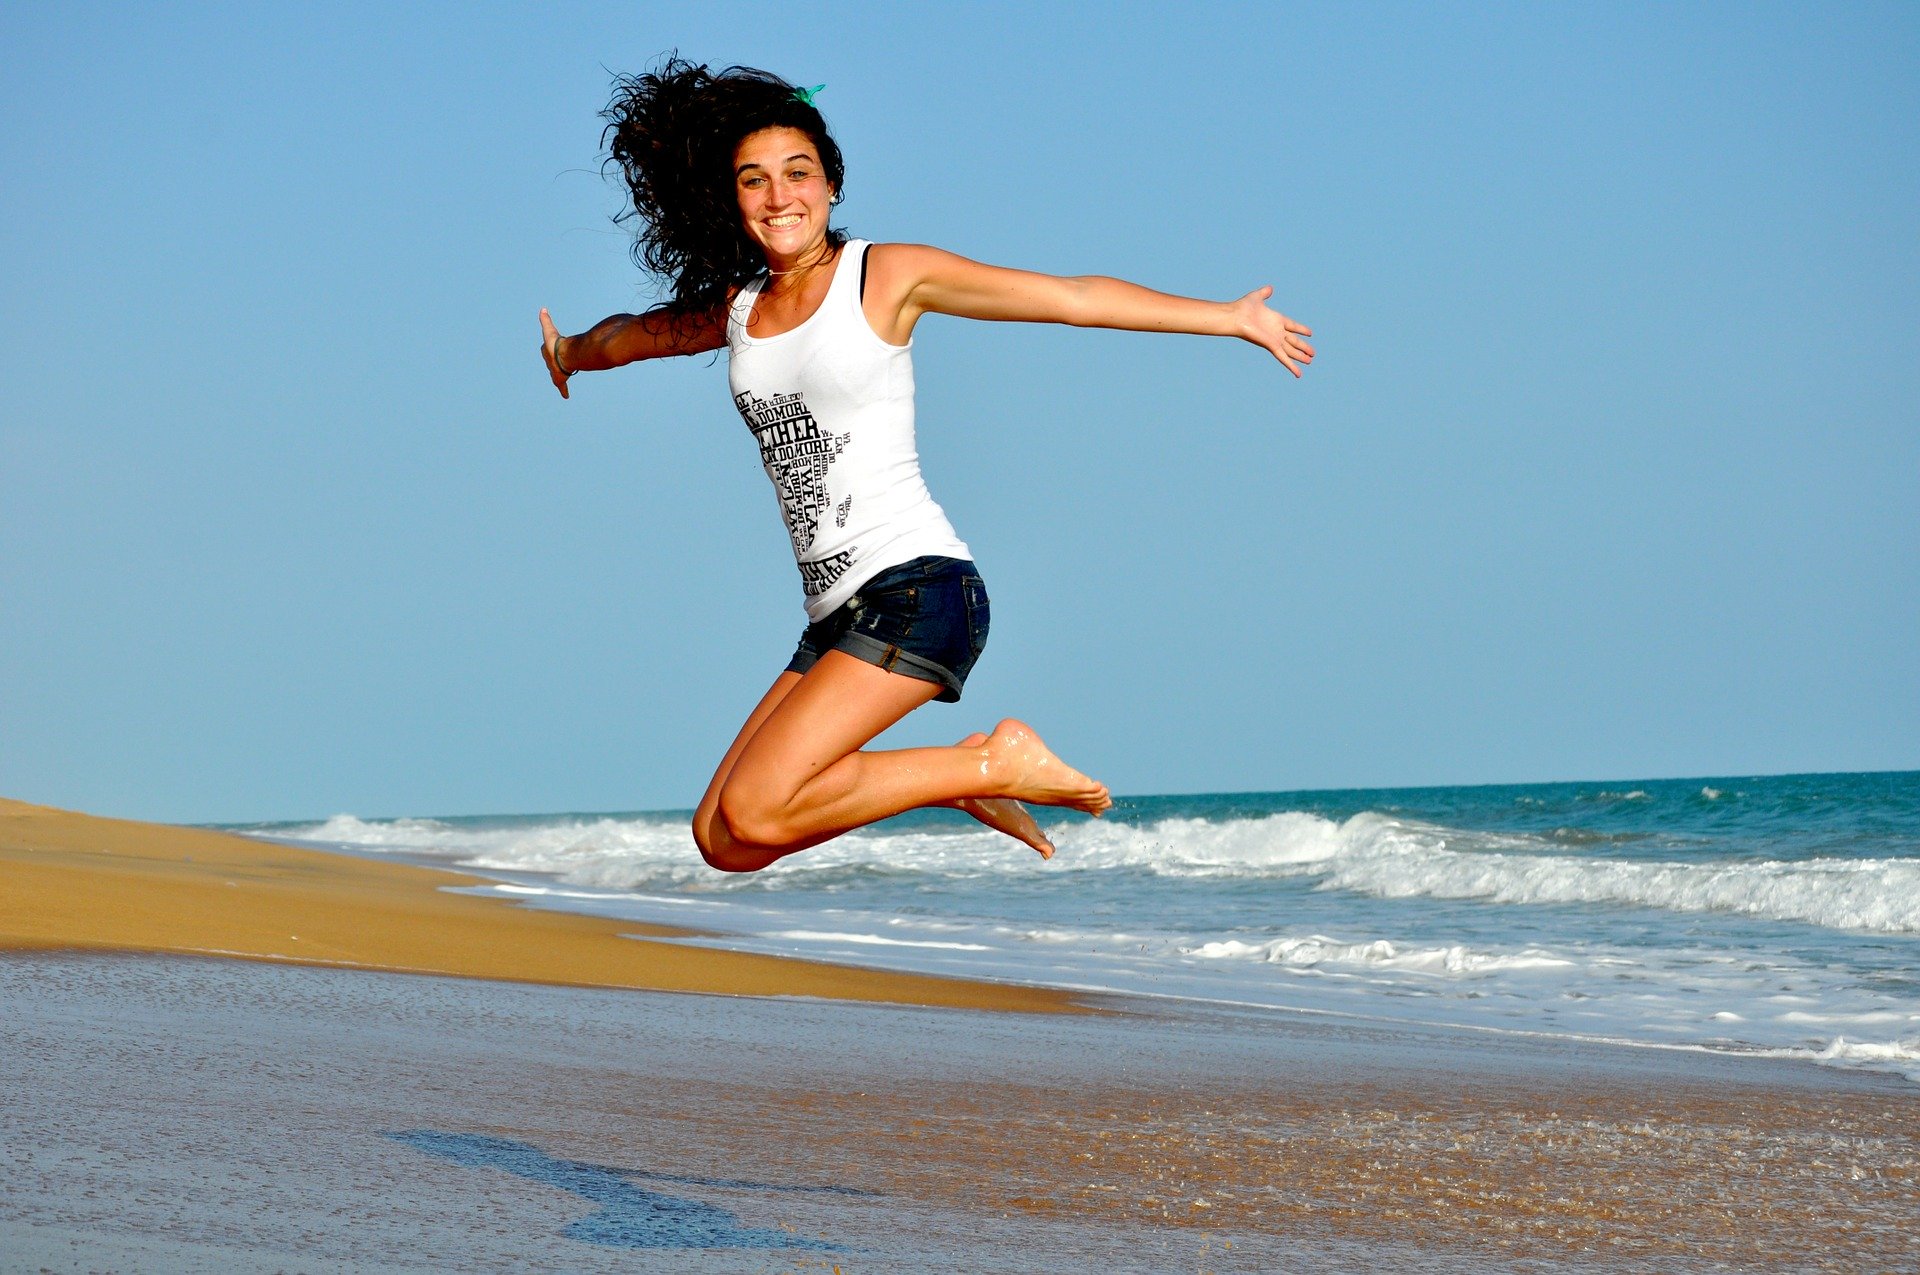 woman jumping at the beach, ocean in the background